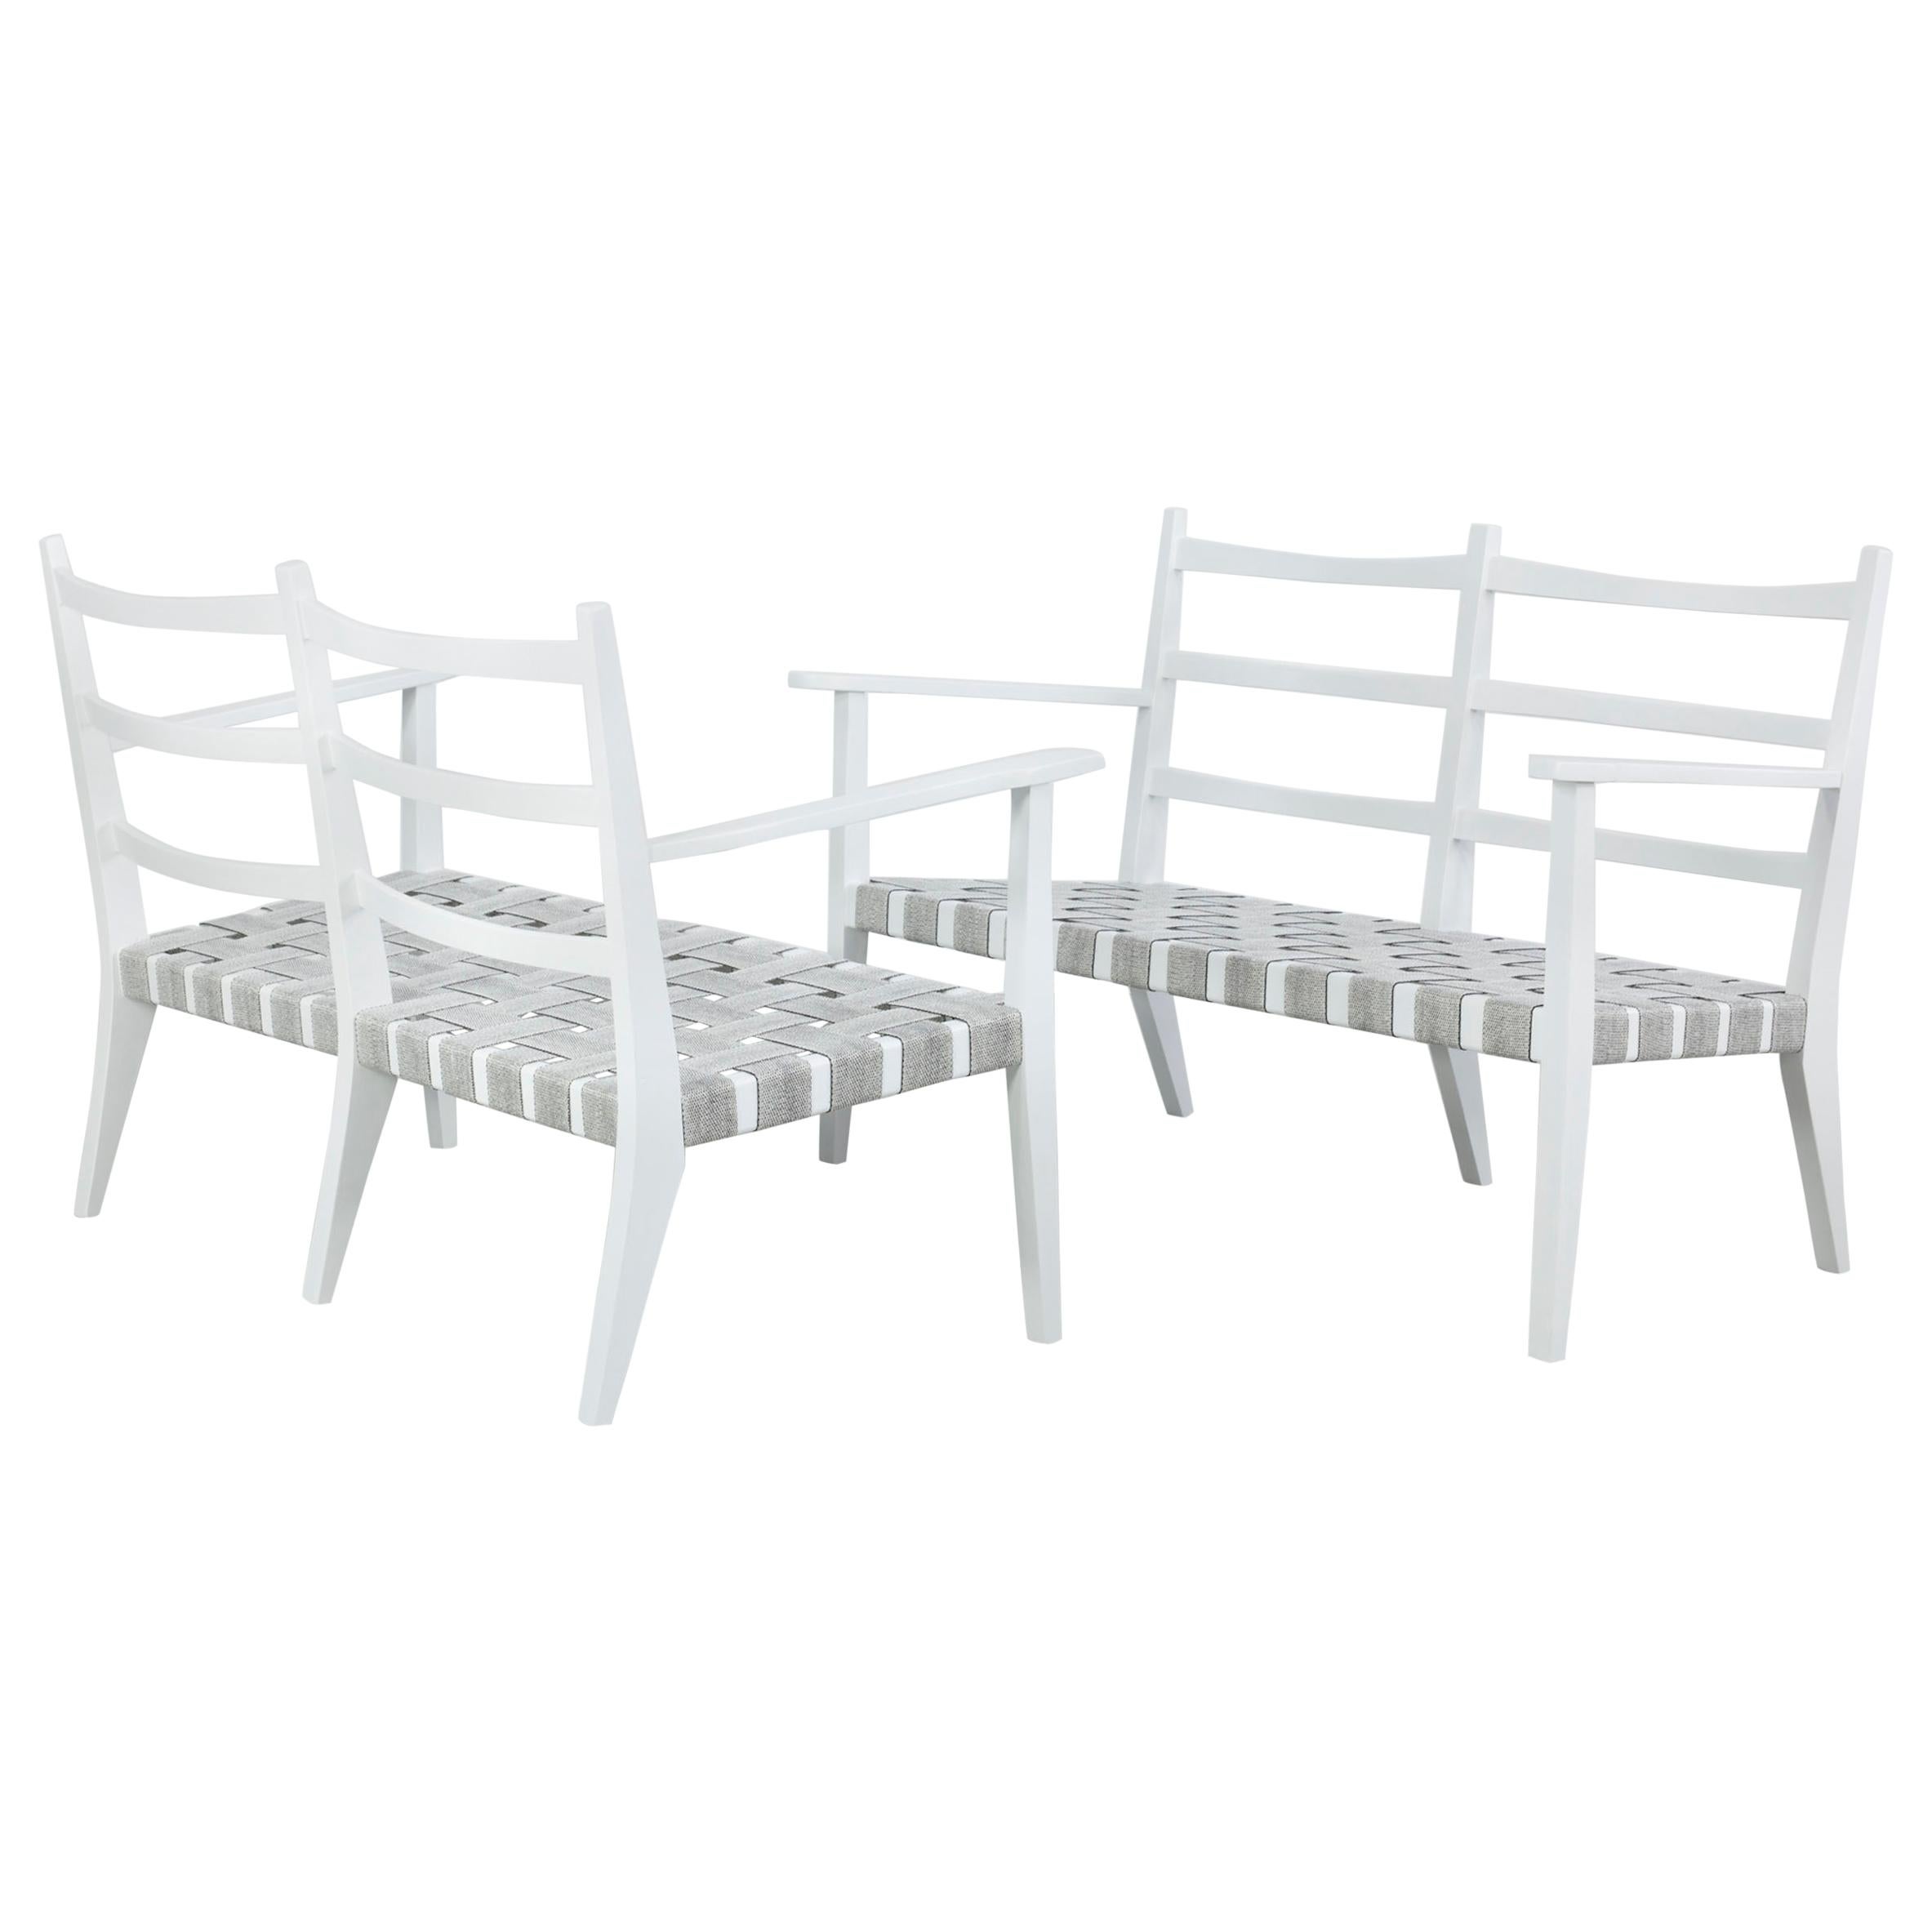 Set of 3 White Painted Wooden Benches with 1 Armchair, Italy, 1960s